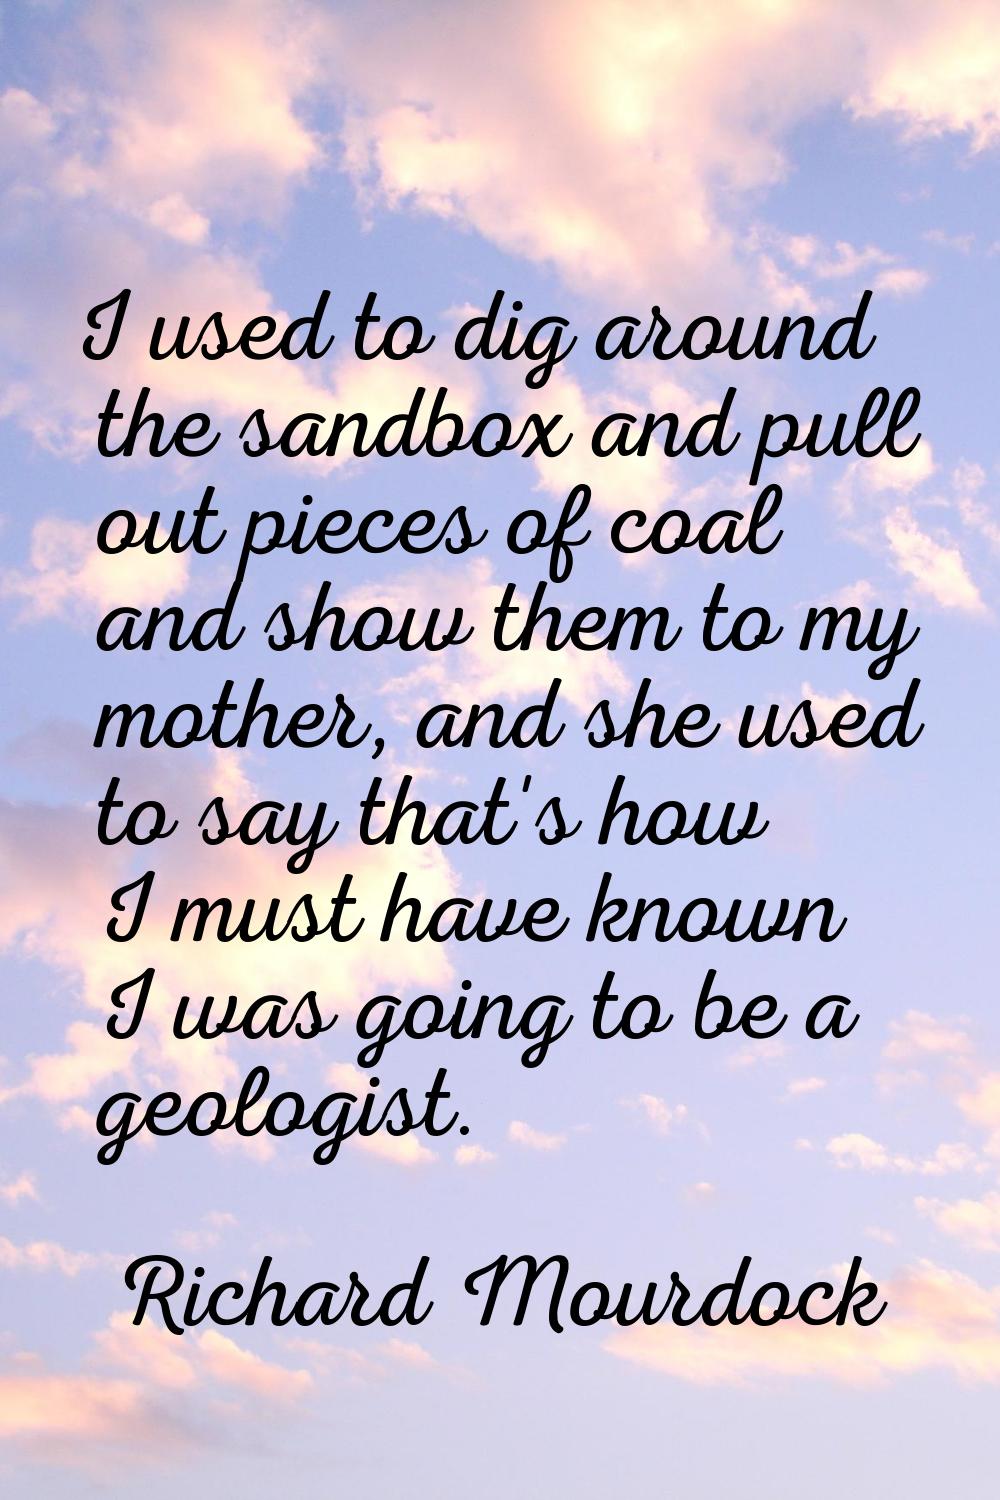 I used to dig around the sandbox and pull out pieces of coal and show them to my mother, and she us